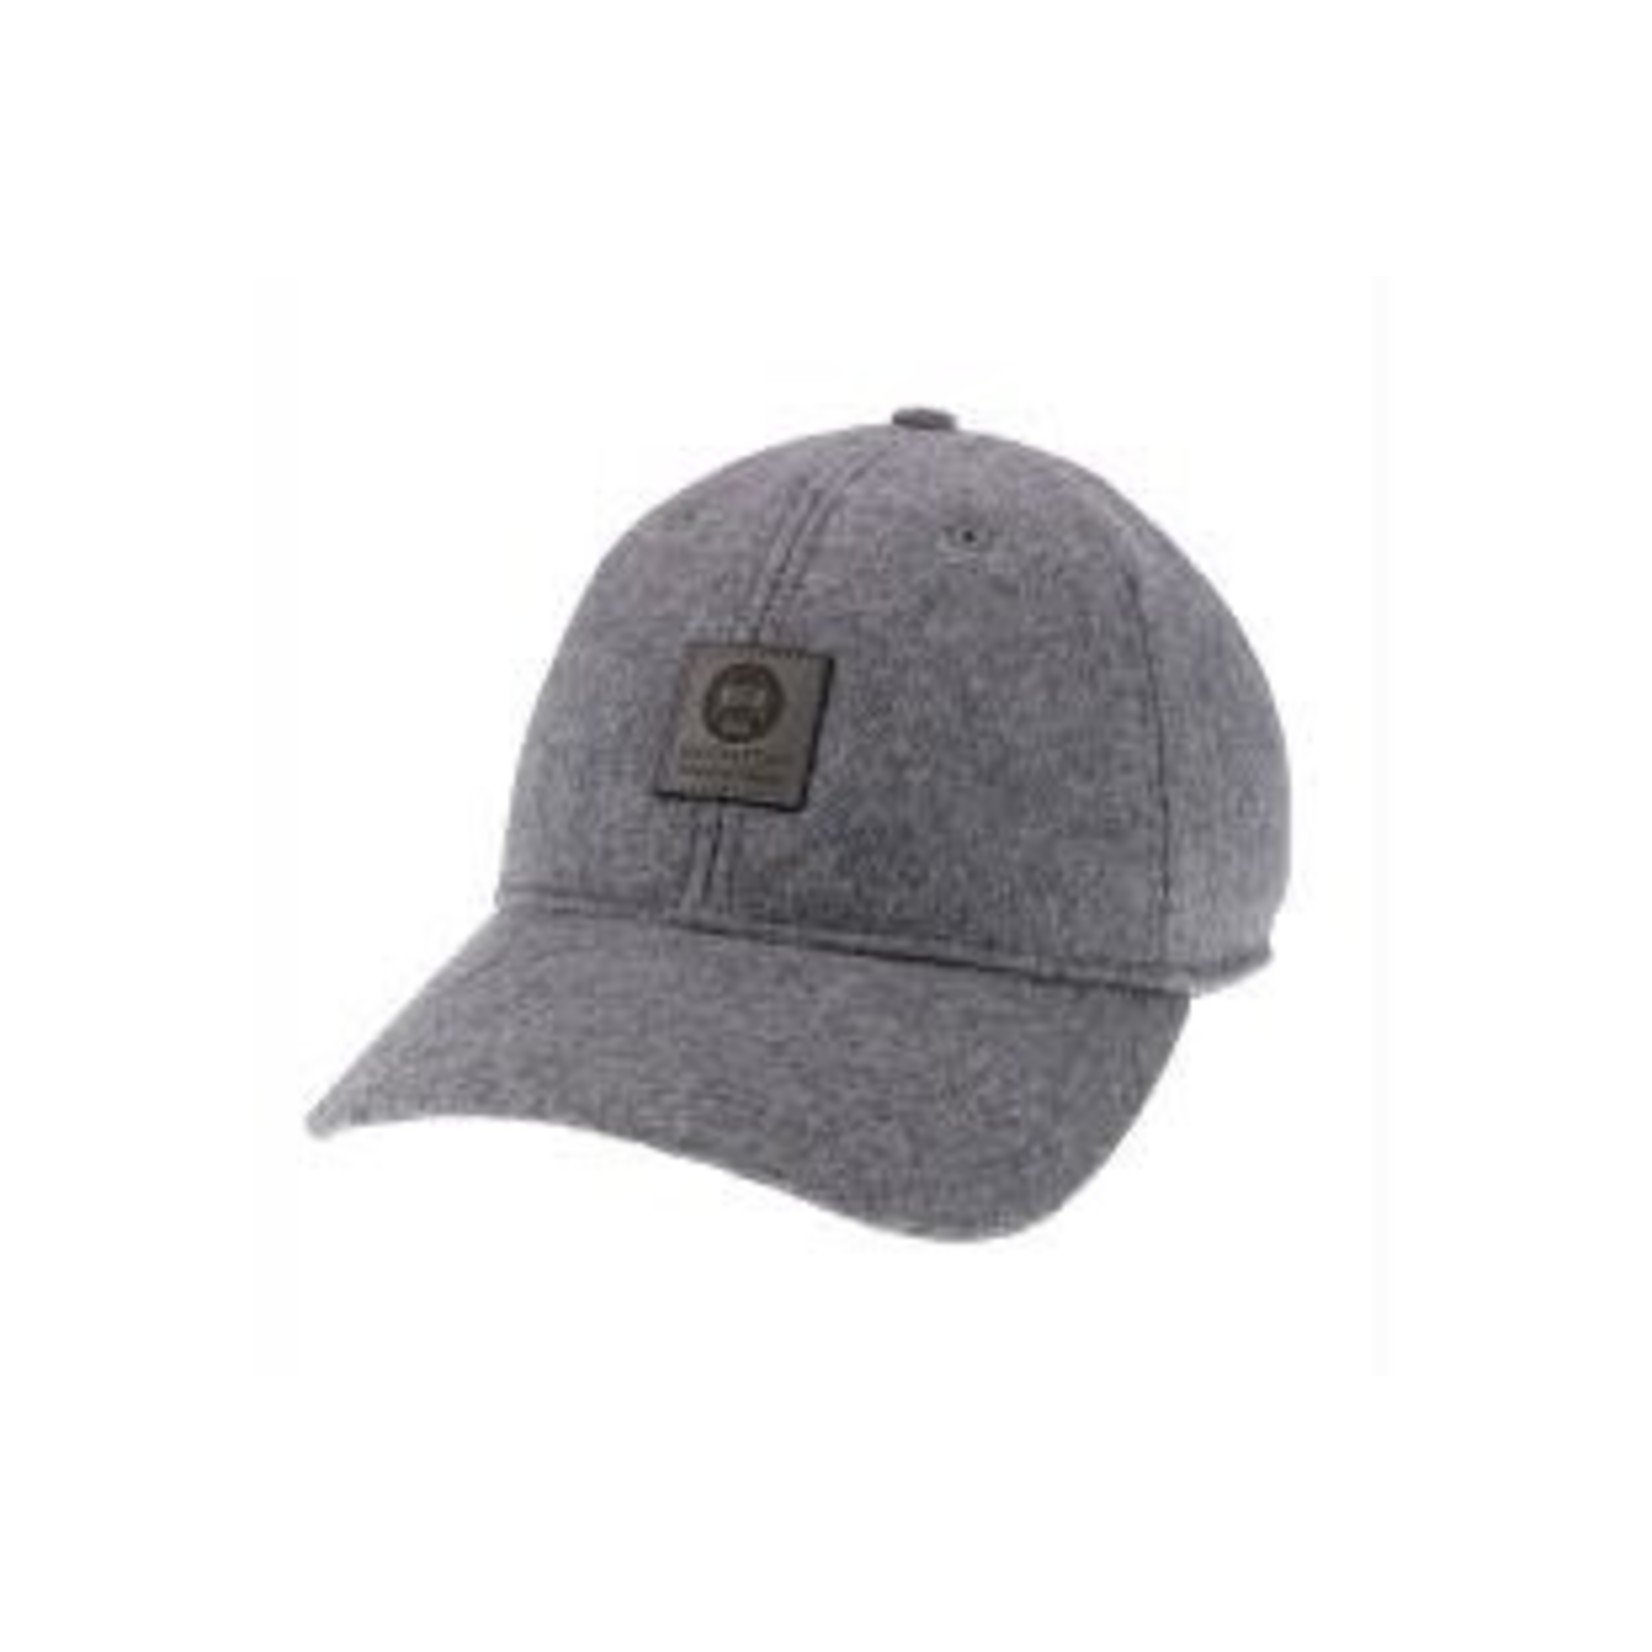 Cap MSM Gray Wool with square patch FINAL SALE CLEARANCE